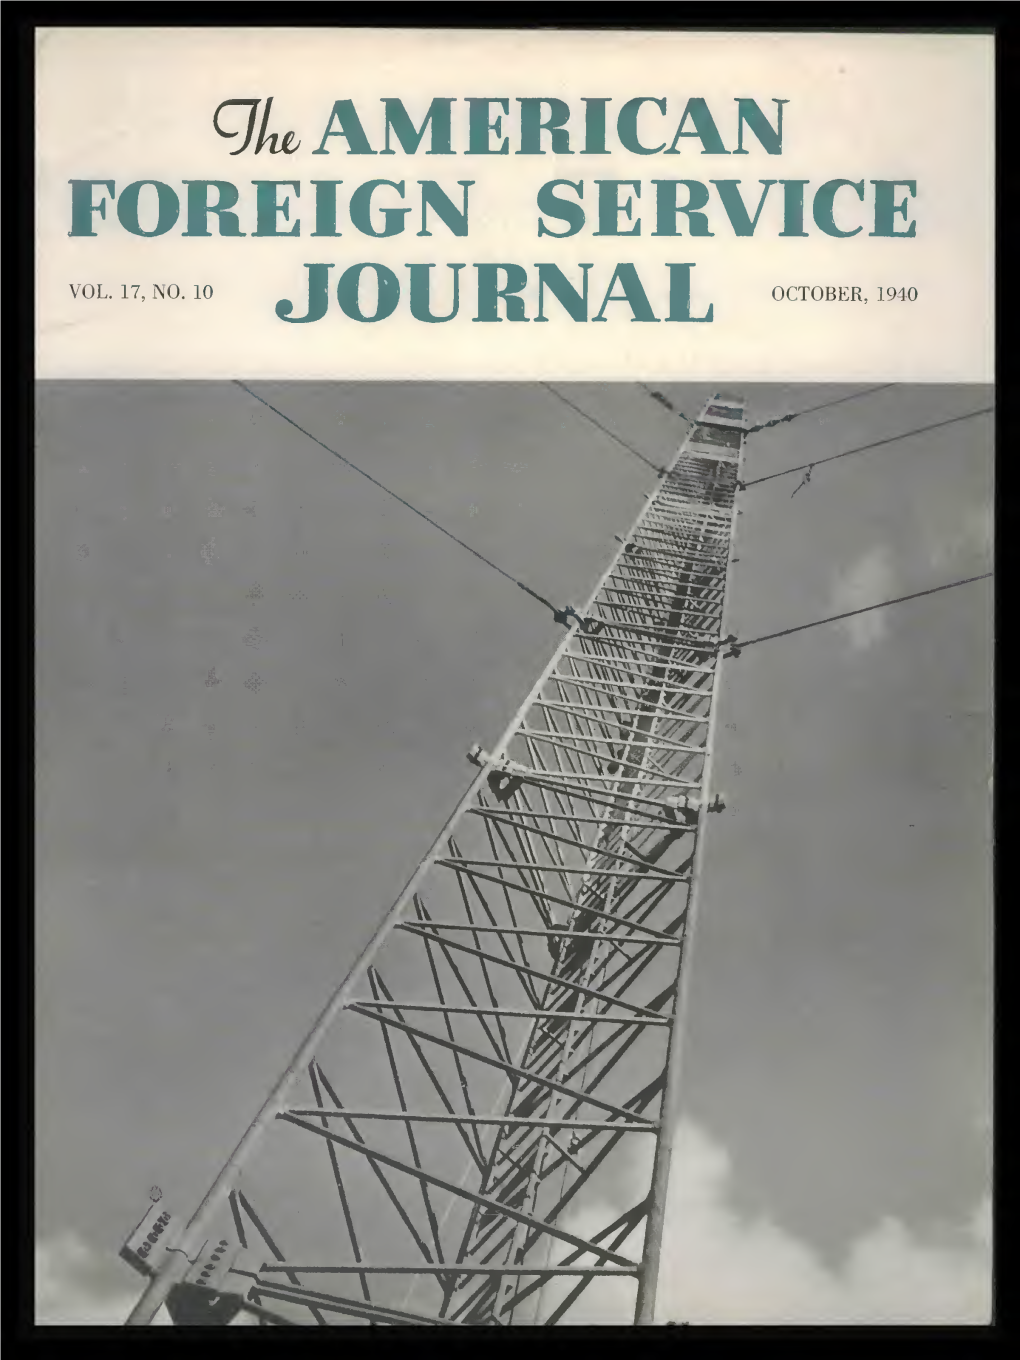 The Foreign Service Journal, October 1940